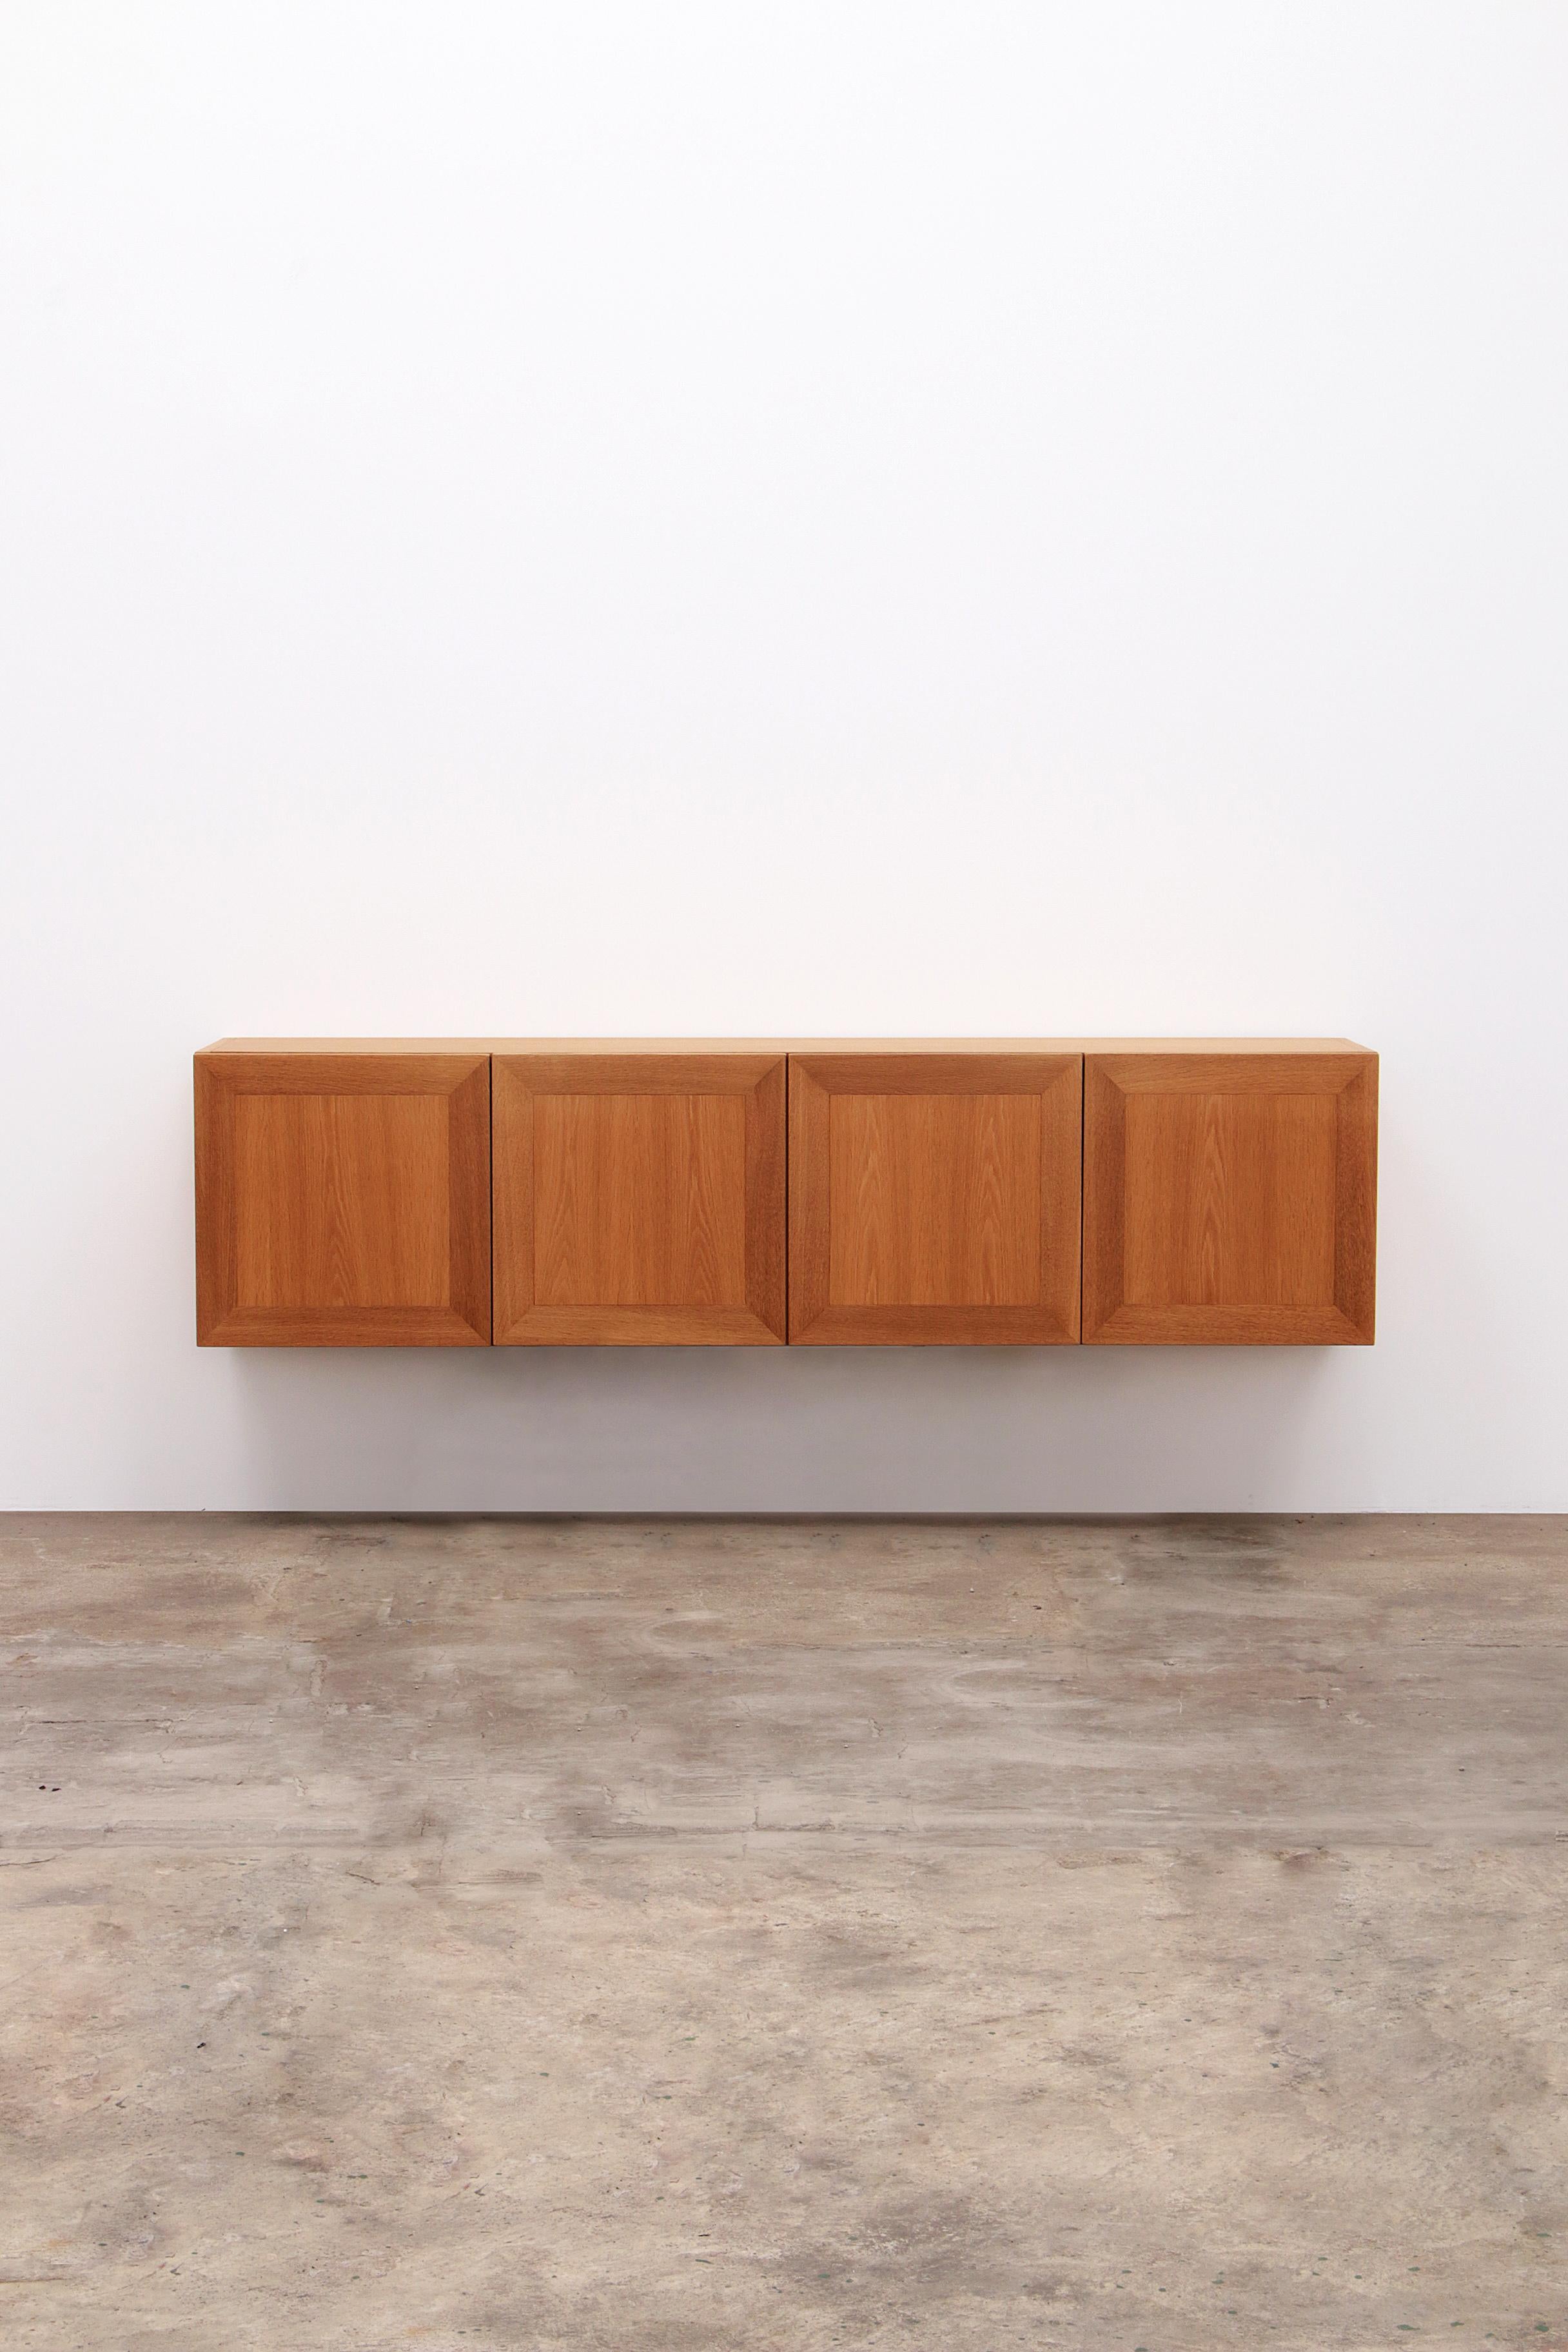 Floating Danish Design Sideboard in Solid Oak - 80s Style

Discover the timeless elegance of Scandinavian design with this floating sideboard, a masterpiece from the 80s that can now enrich your interior. This solid oak piece of furniture has been